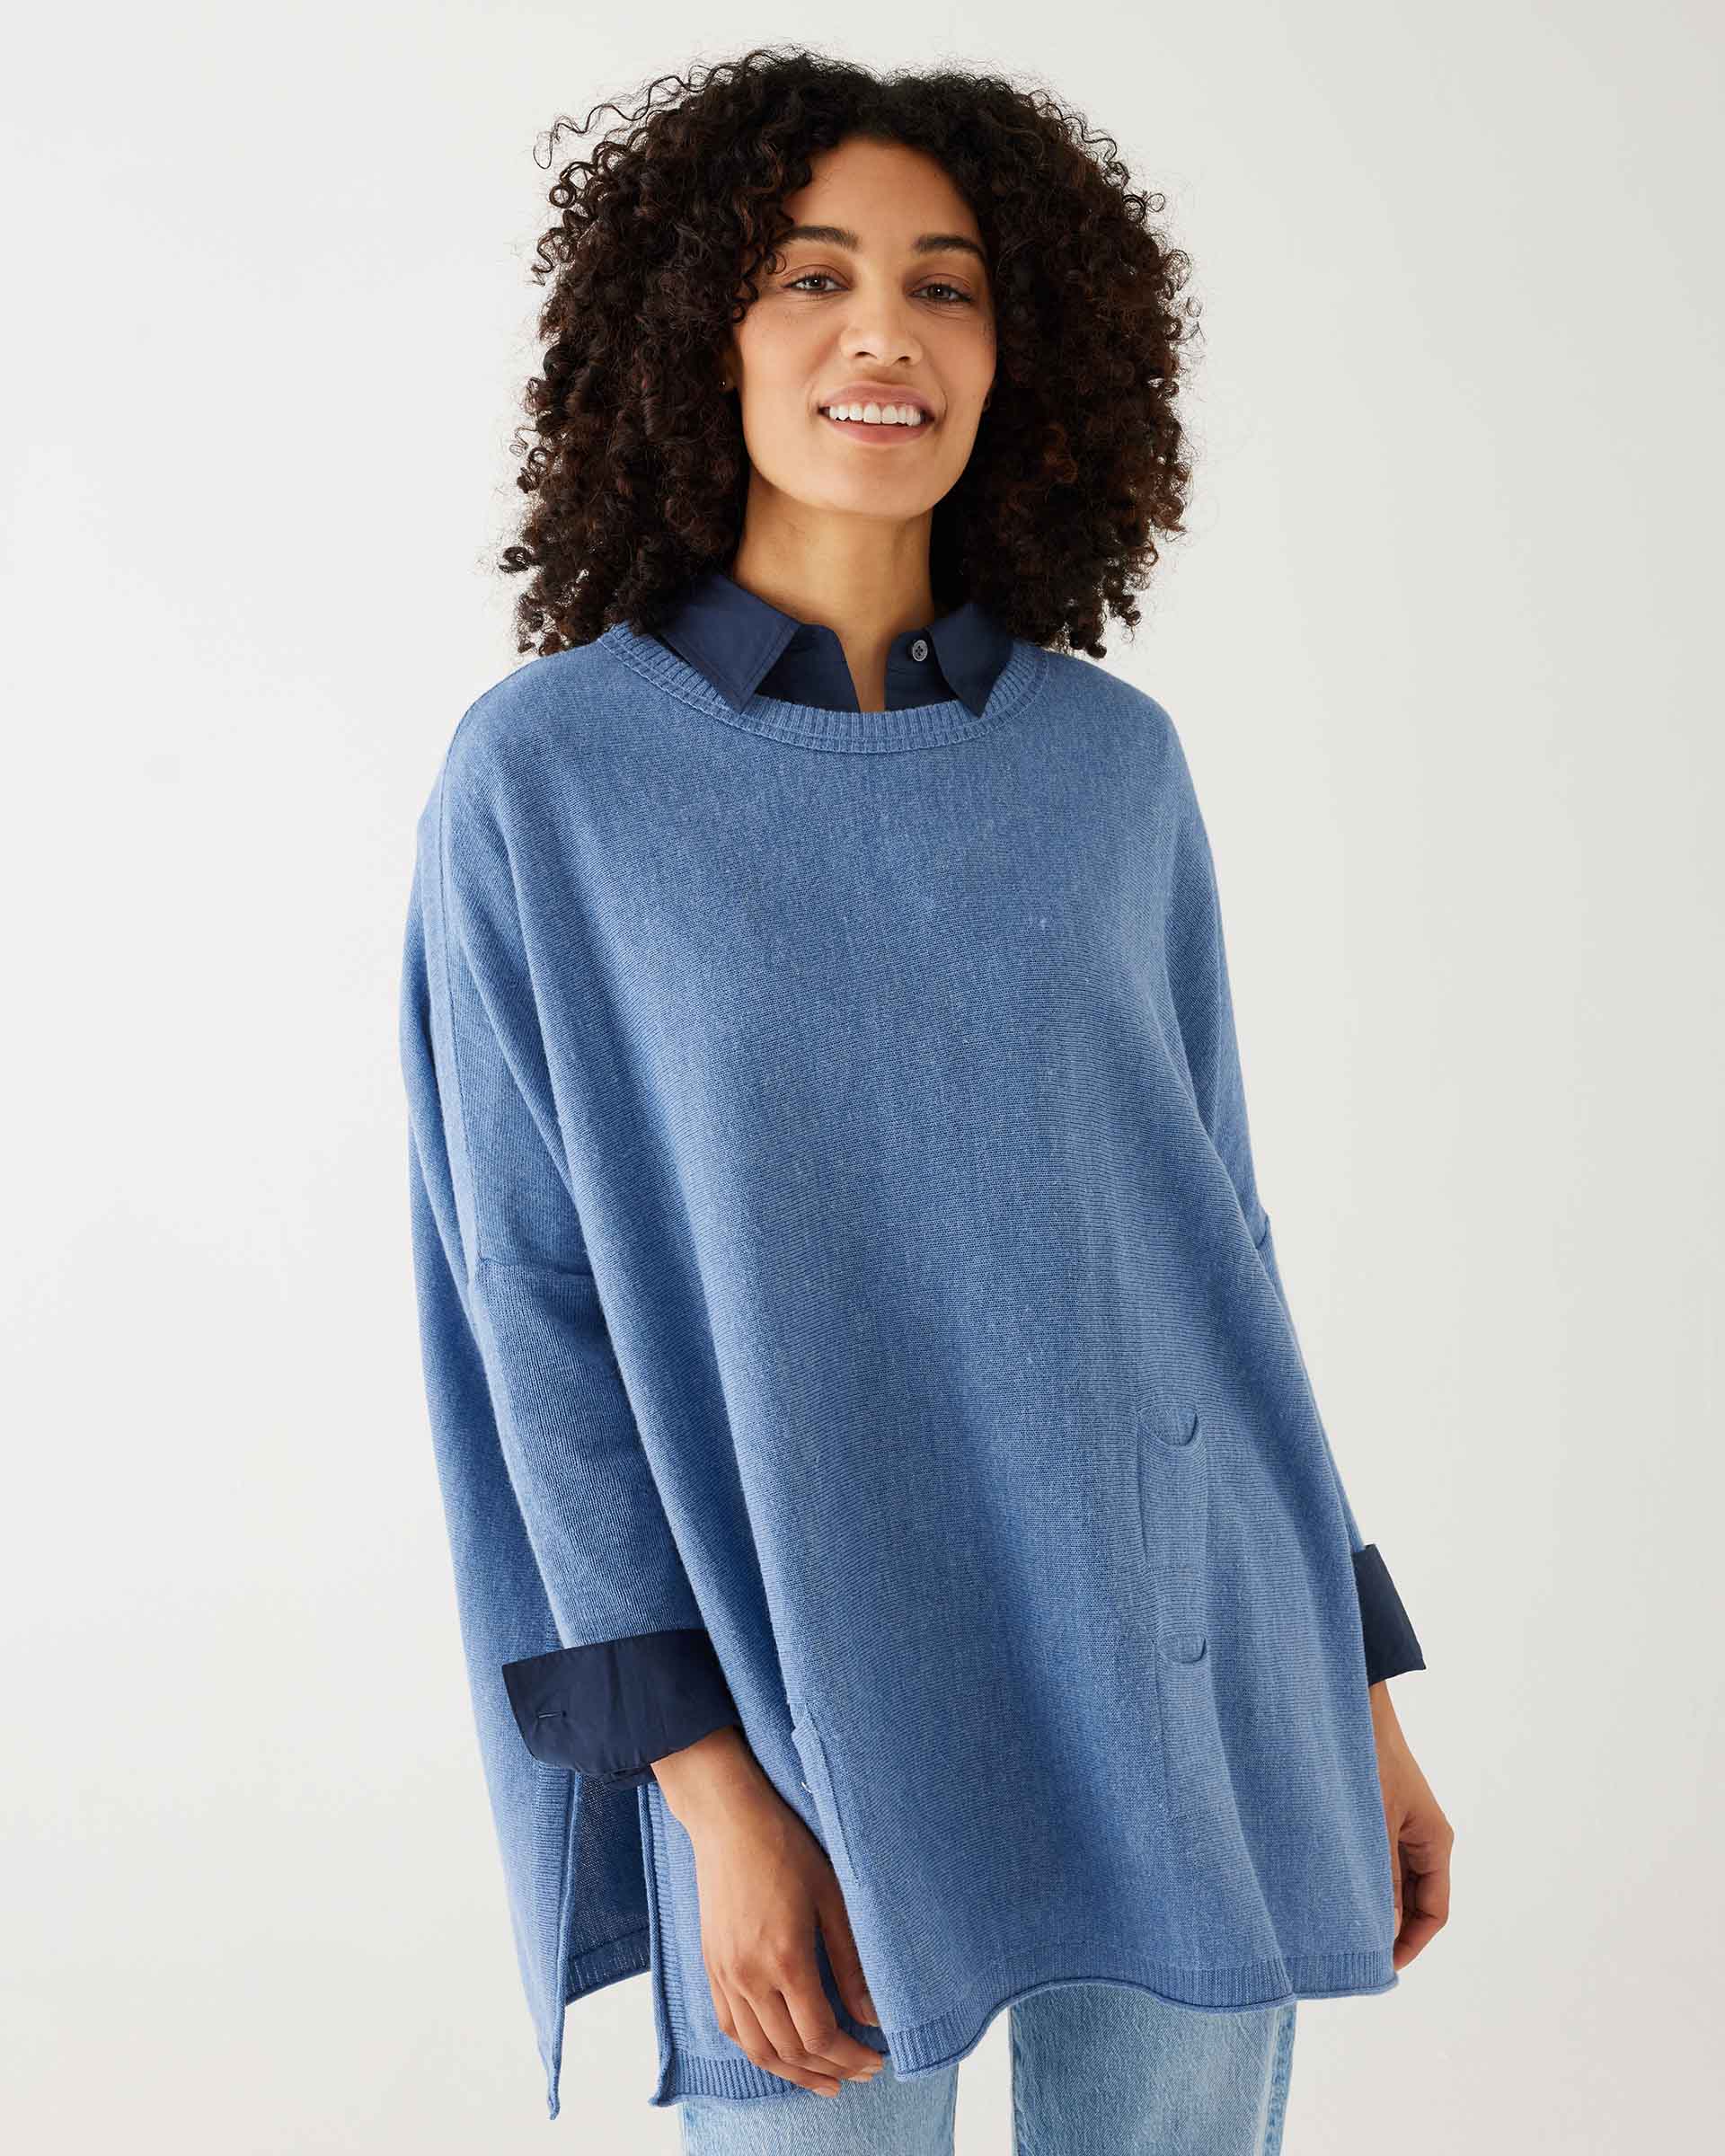 female wearing deep blue sweater with blue shirt cuffed with split sides on a white background